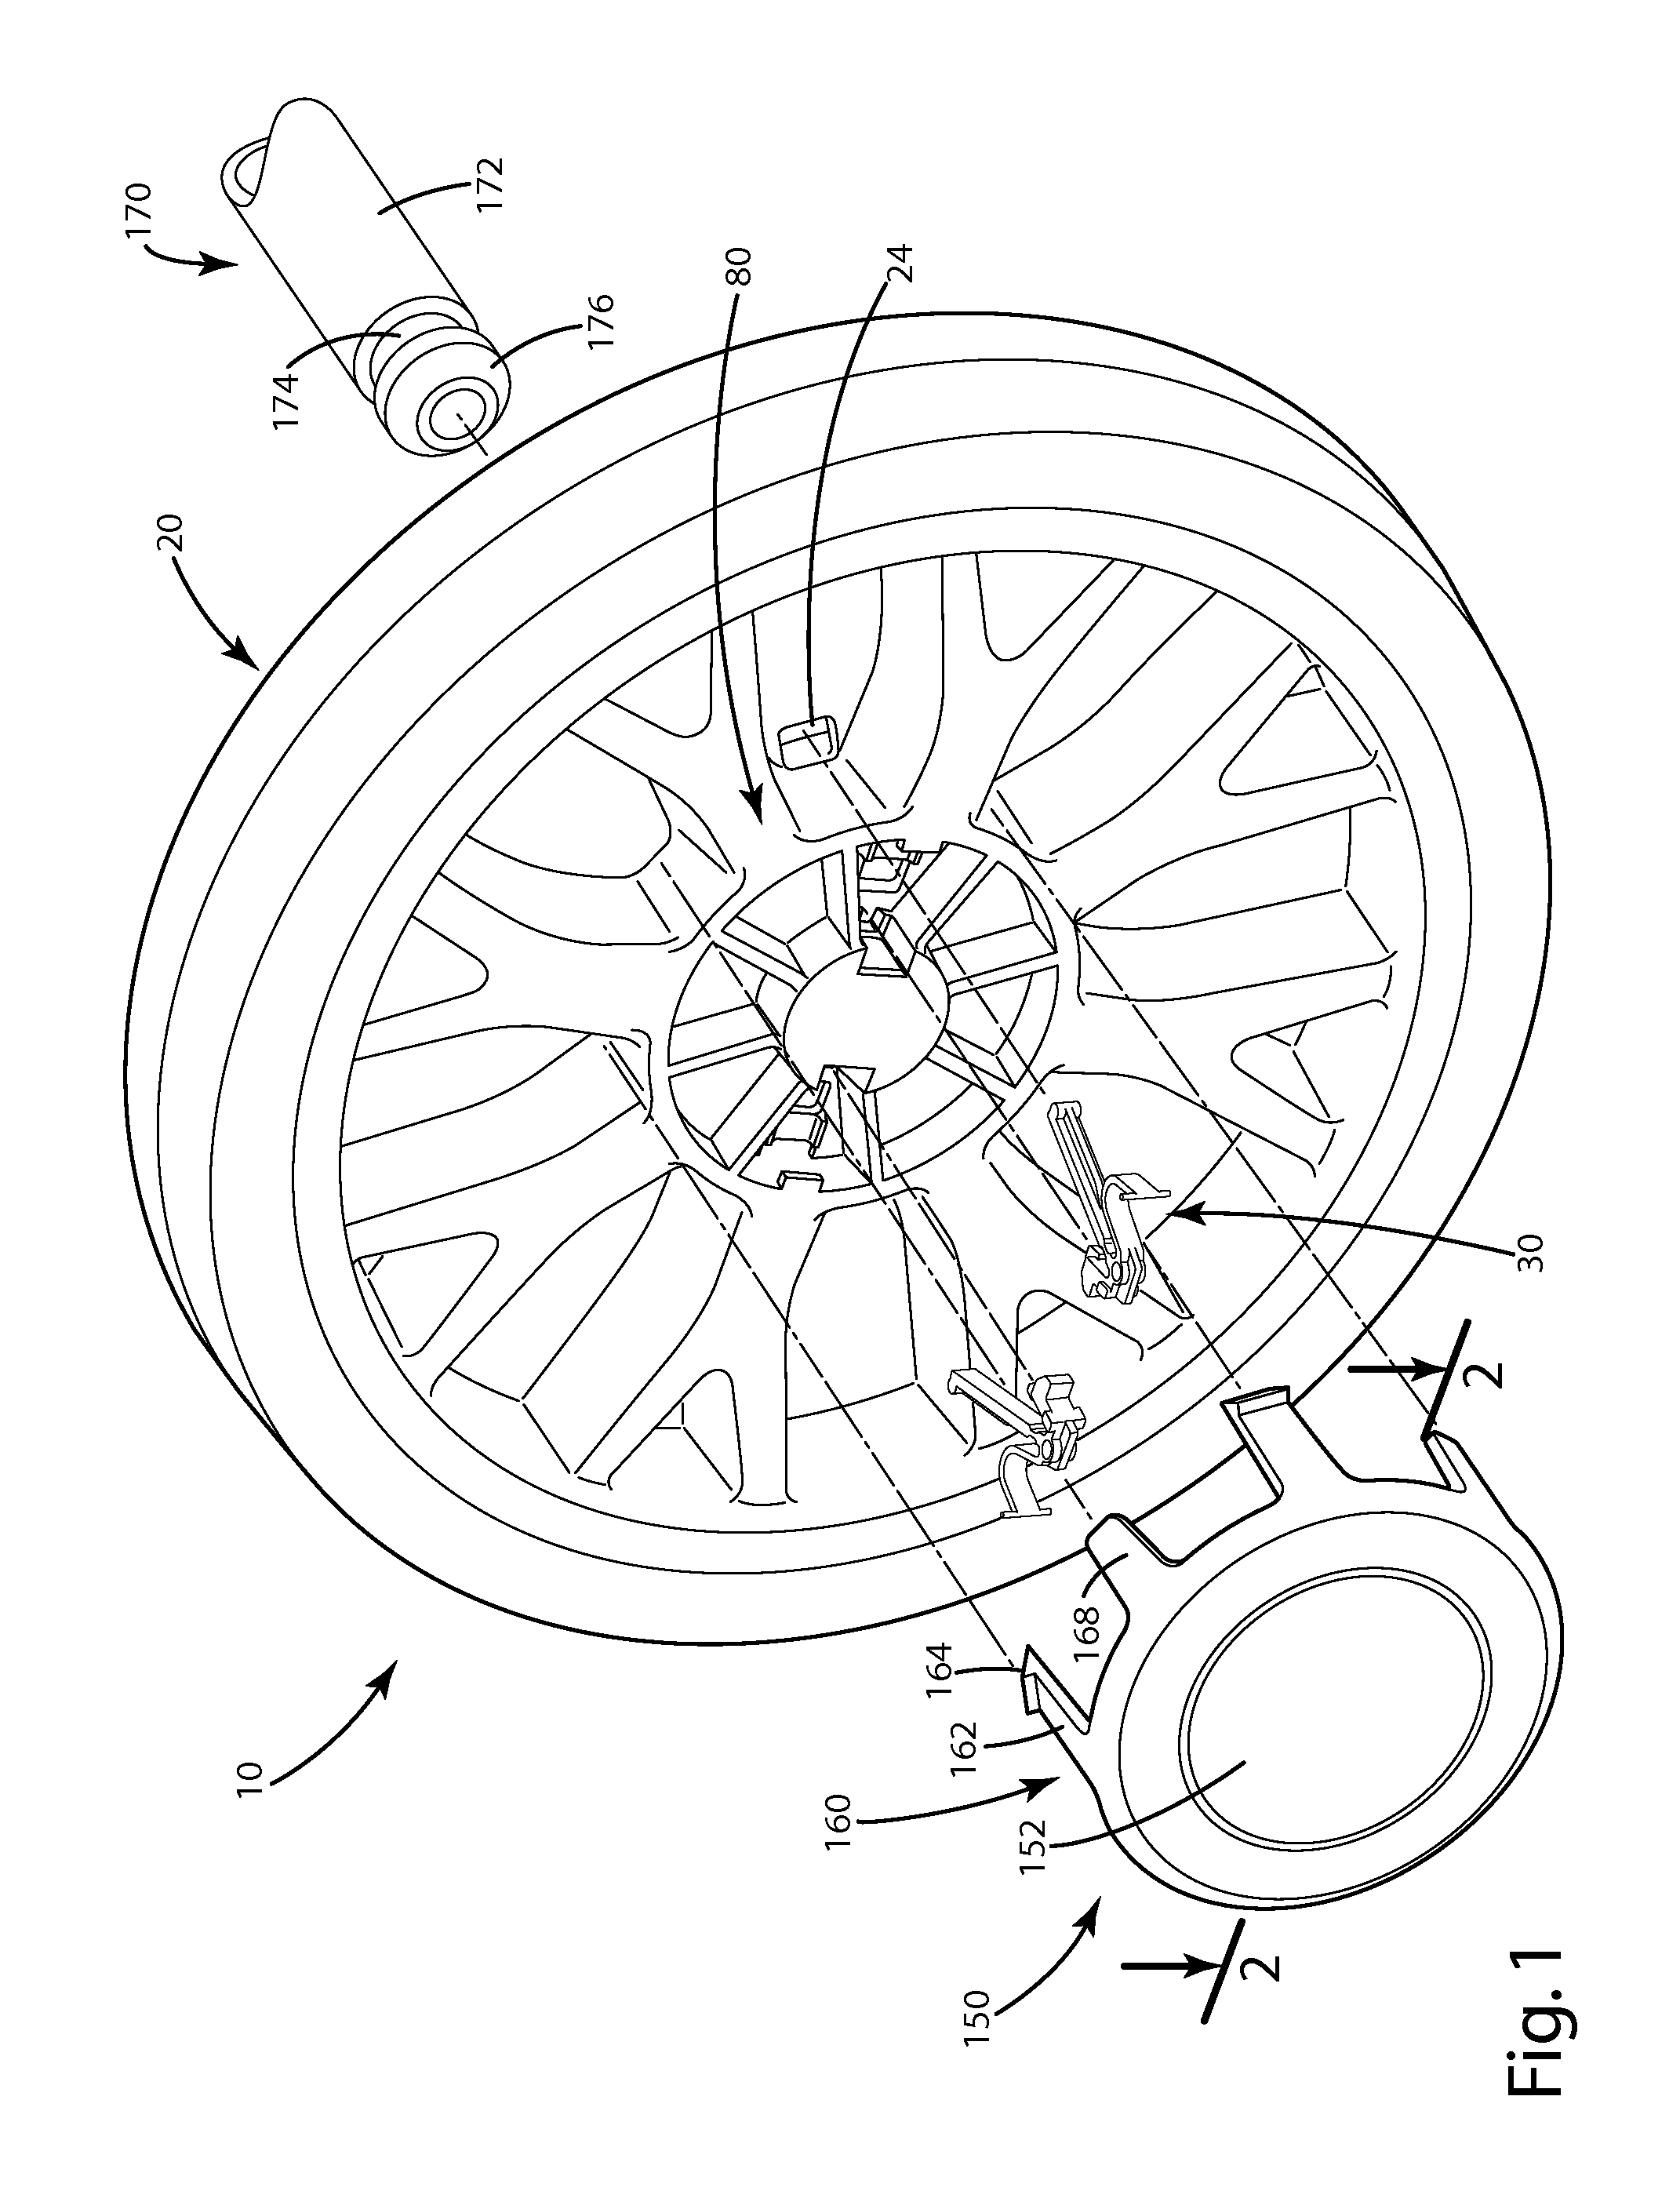 Wheel assembly for trash/recycling cart